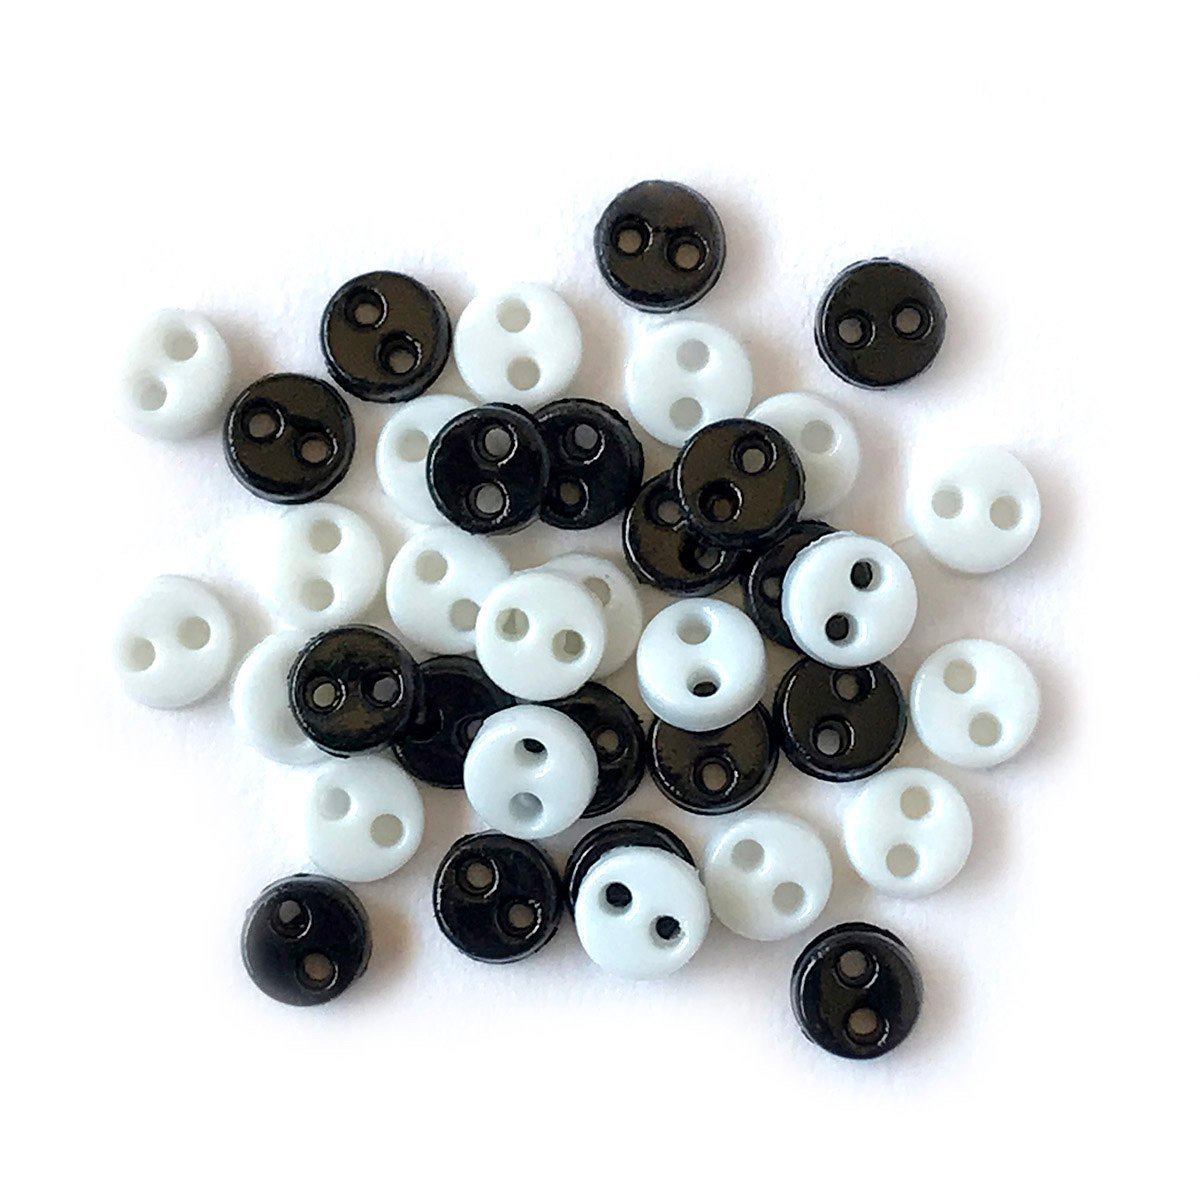 Black & White Micro-1811 - Buttons Galore and More